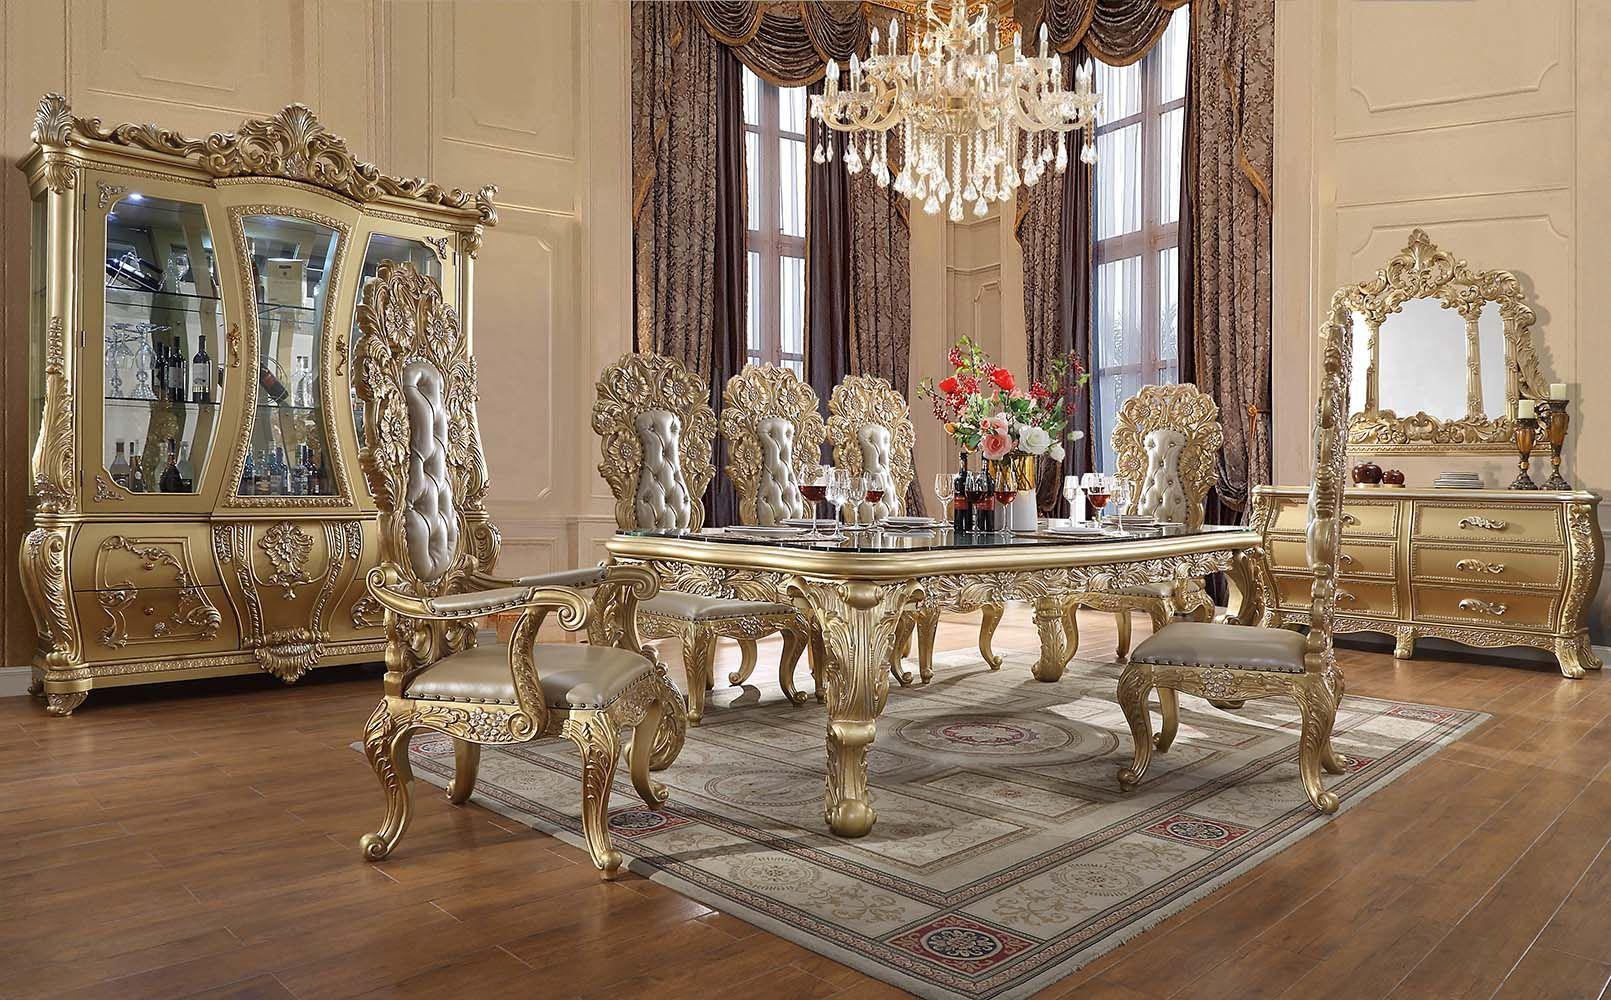 Classic Dining Room Set Cabriole Dining Room Set 11PCS DN01482-T-11PCS DN01482-T-11PCS in Gold PU